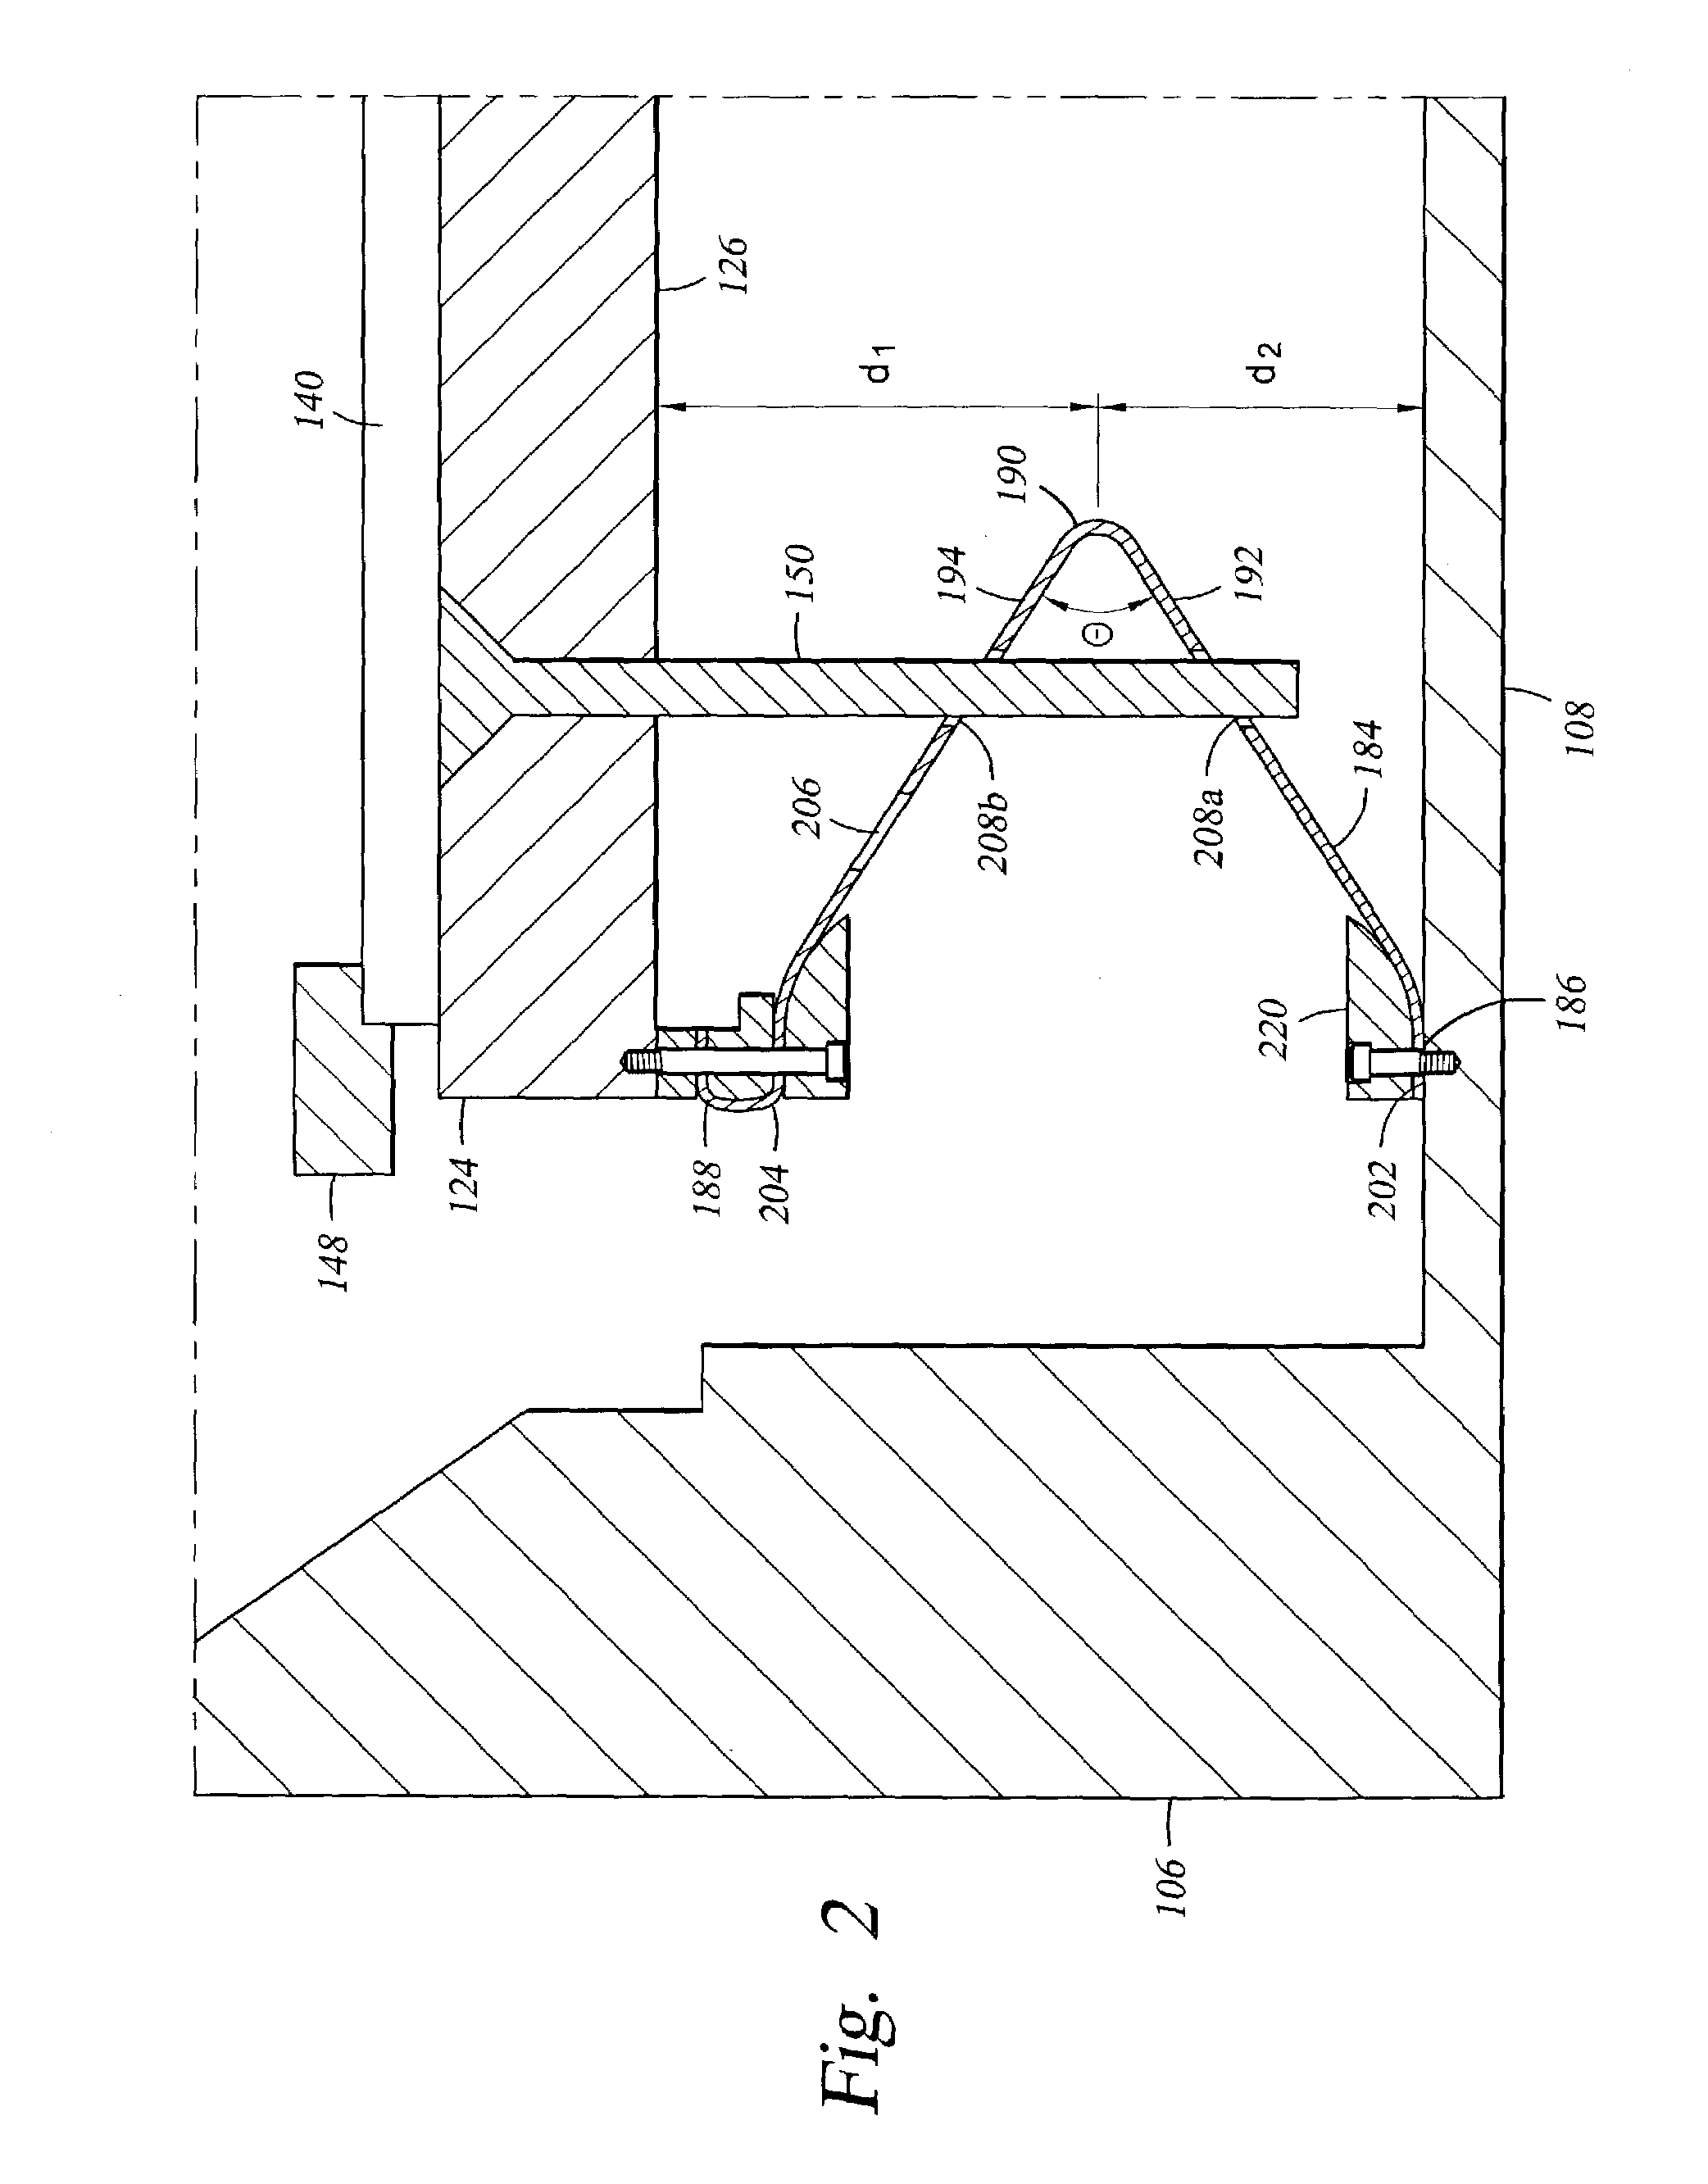 RF current return path for a large area substrate plasma reactor